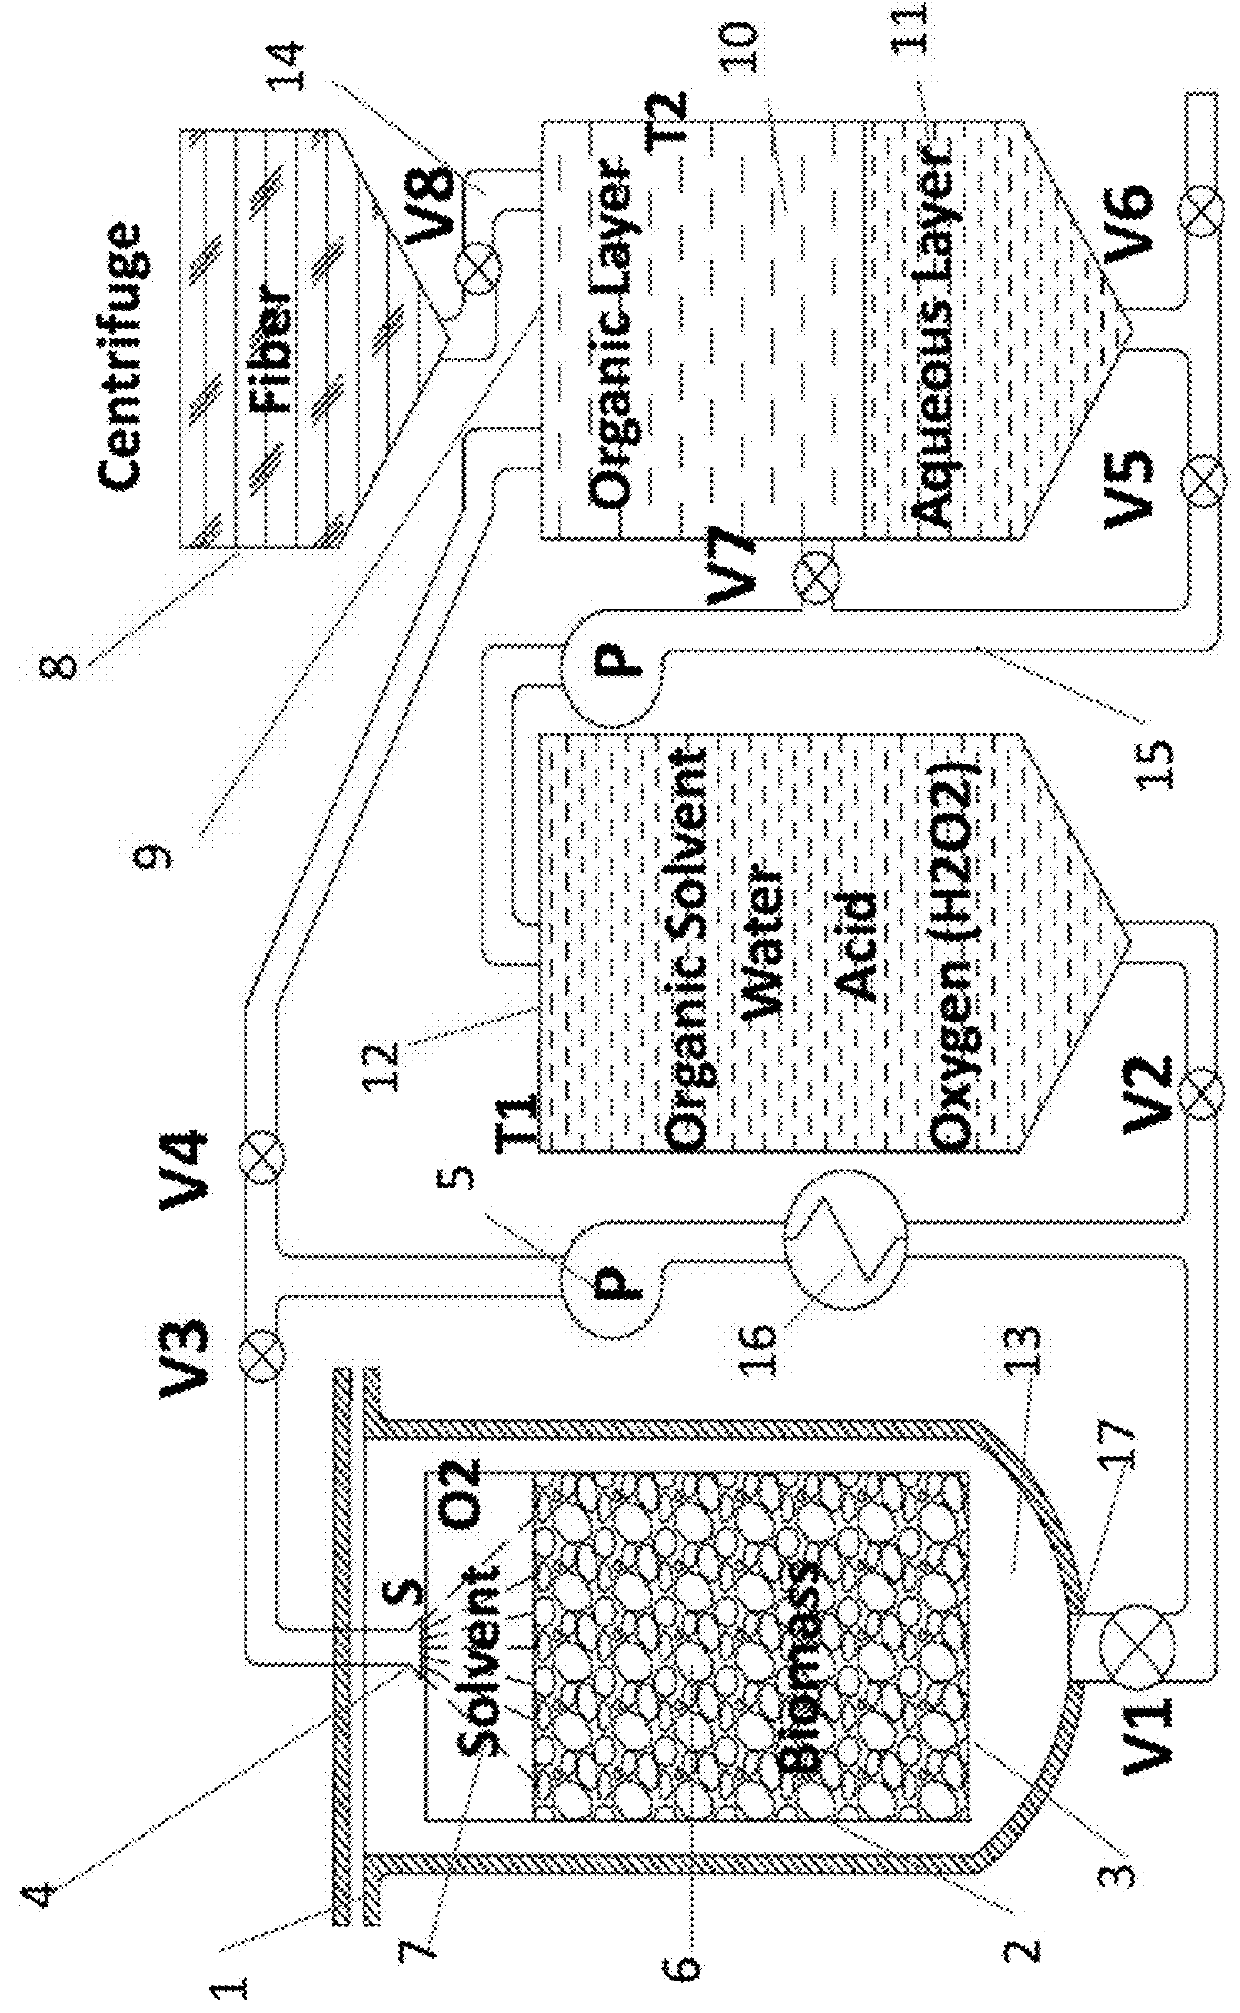 Oxygen assisted organosolv process, system and method for delignification of lignocellulosic materials and lignin recovery